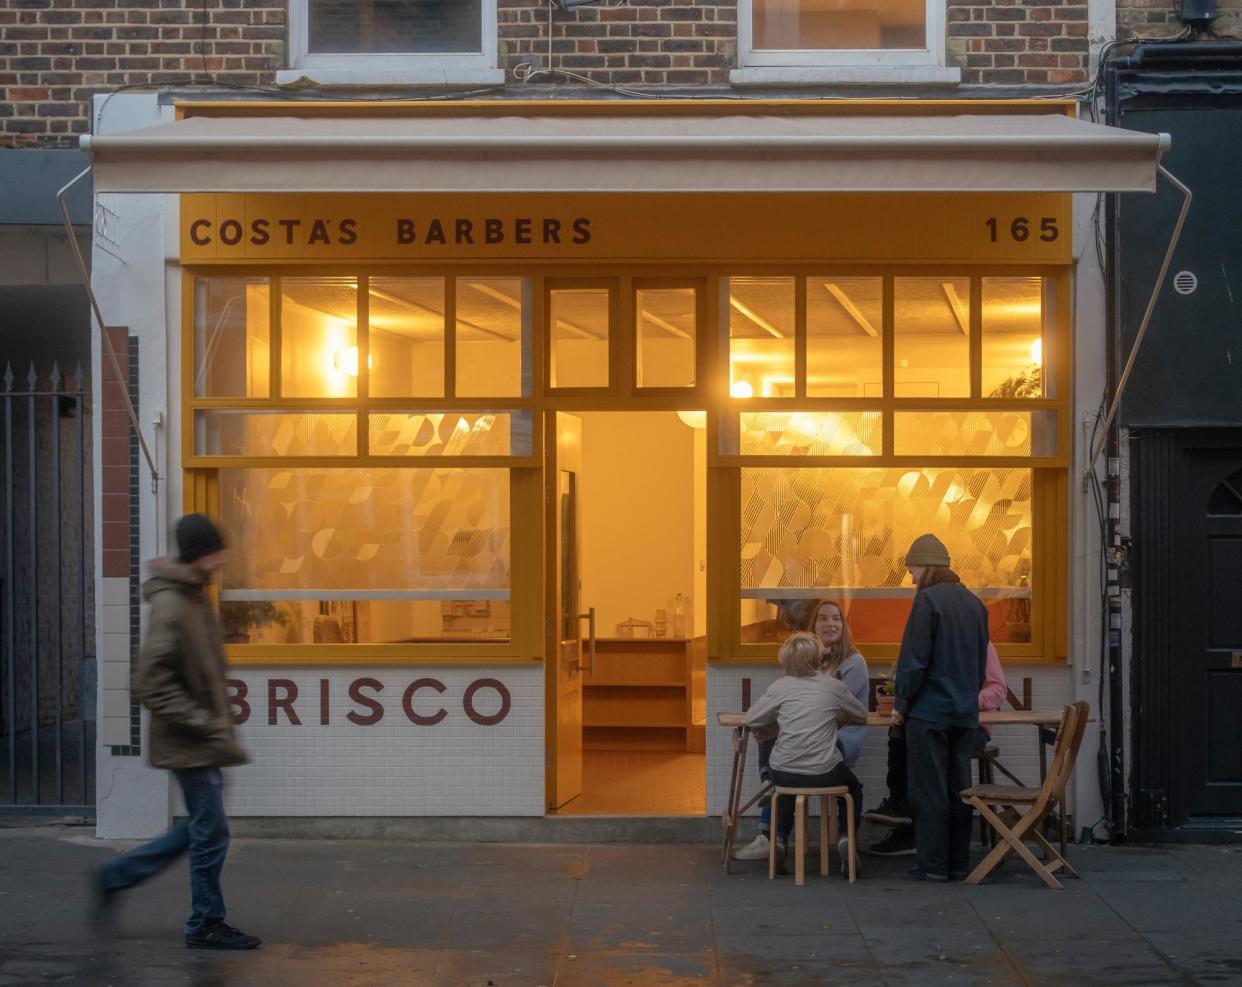 <span>‘Craft and delight’: Costa’s Barbers, a Battersea High Street barber shop turned office and home to architects Pandora Loran and Thom Brisco.</span><span>Photograph: Jim Stephenson</span>